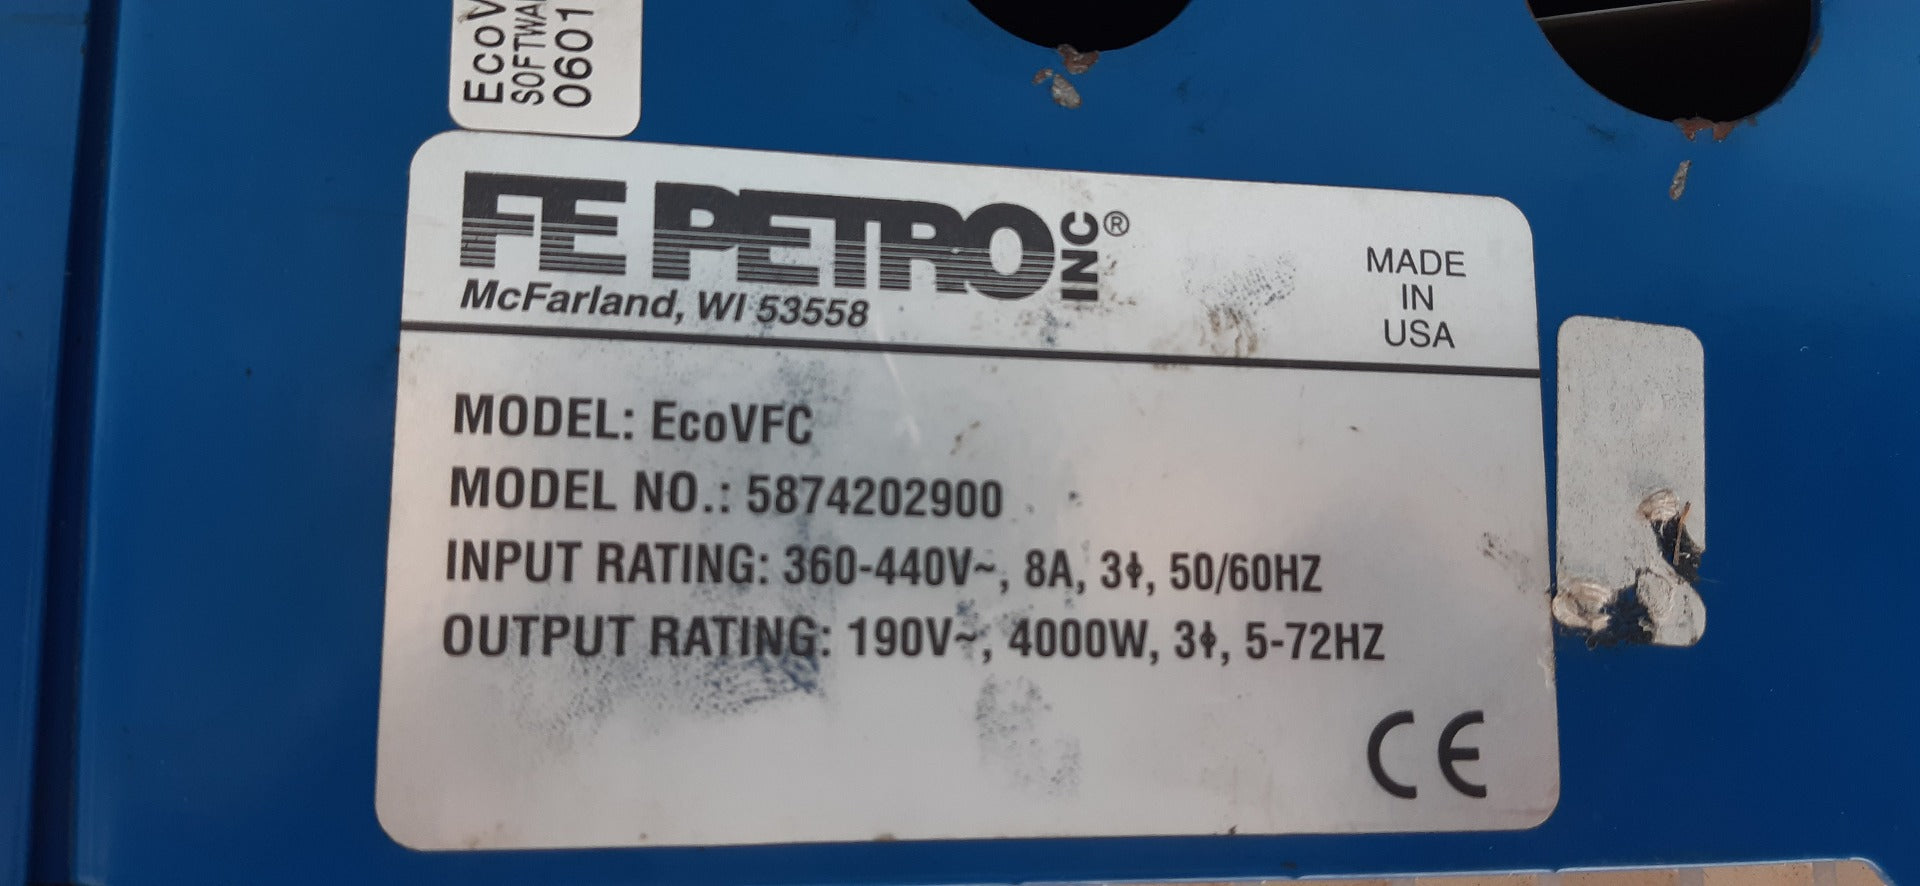 Fe petro ecovfc variable frequency controller